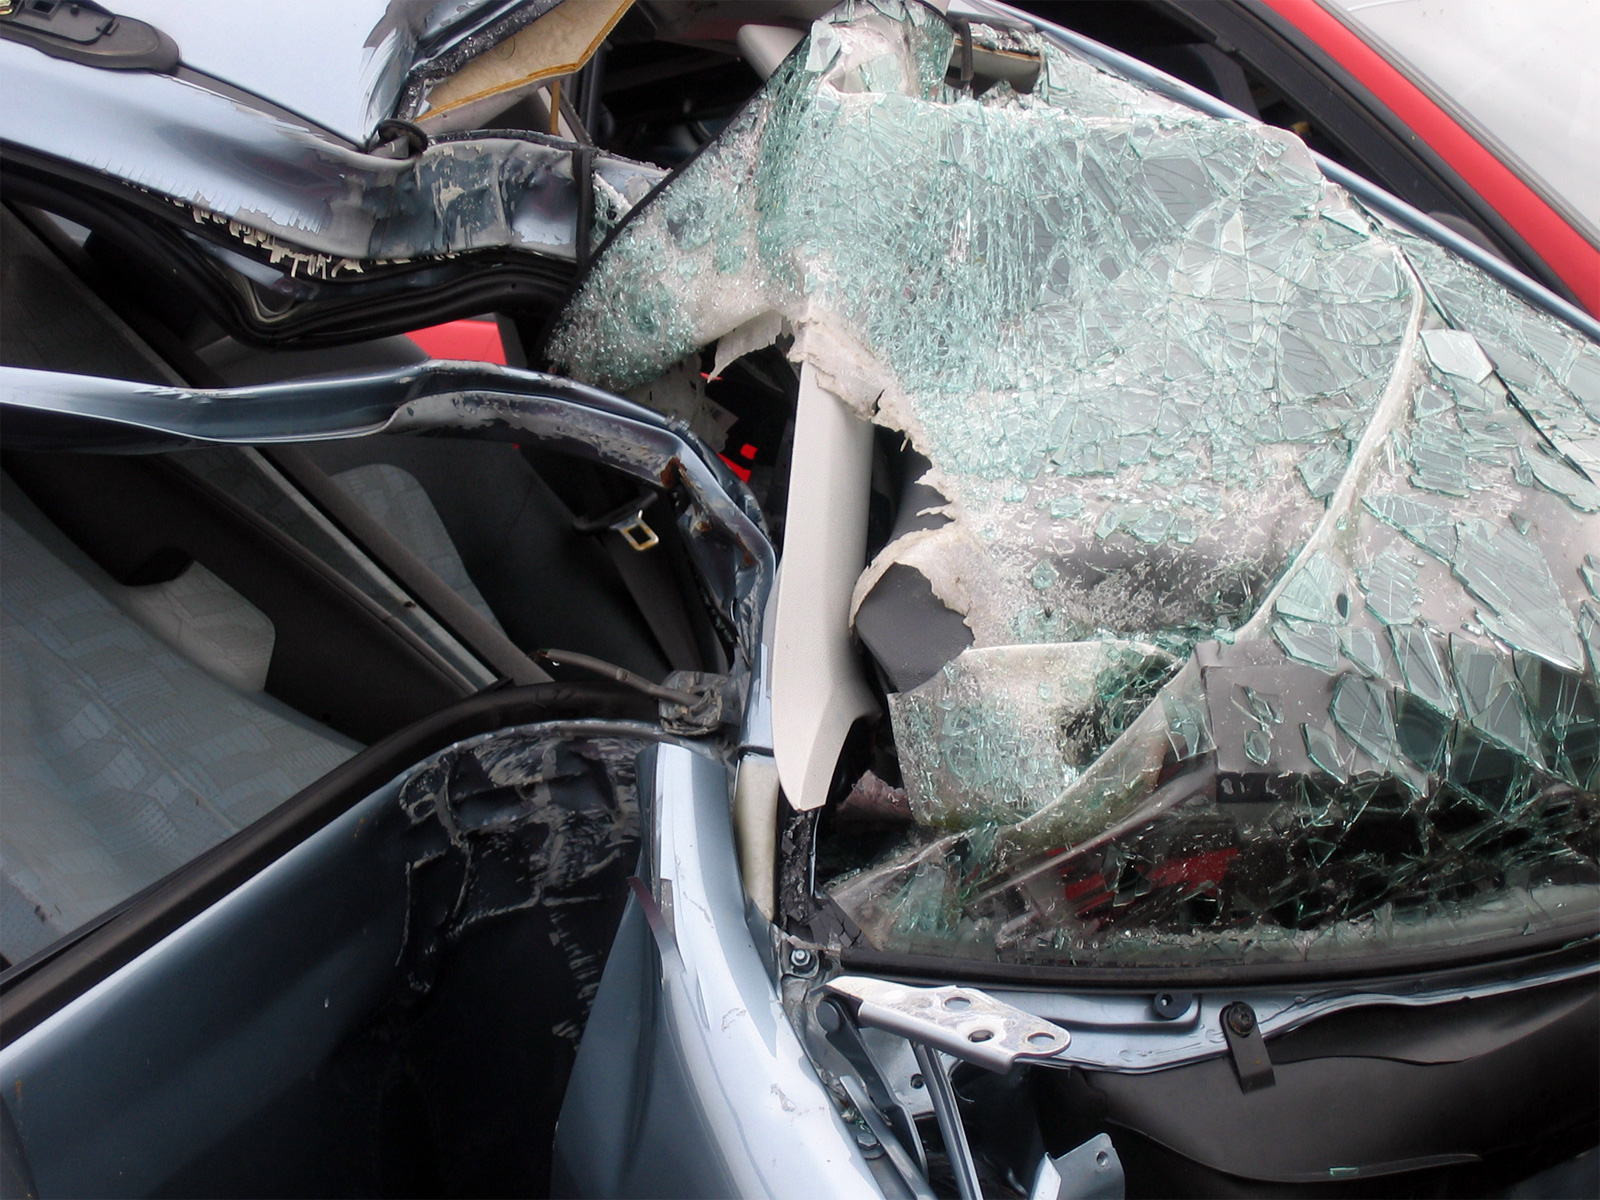 West Covina Accident Attorney 4.jpg